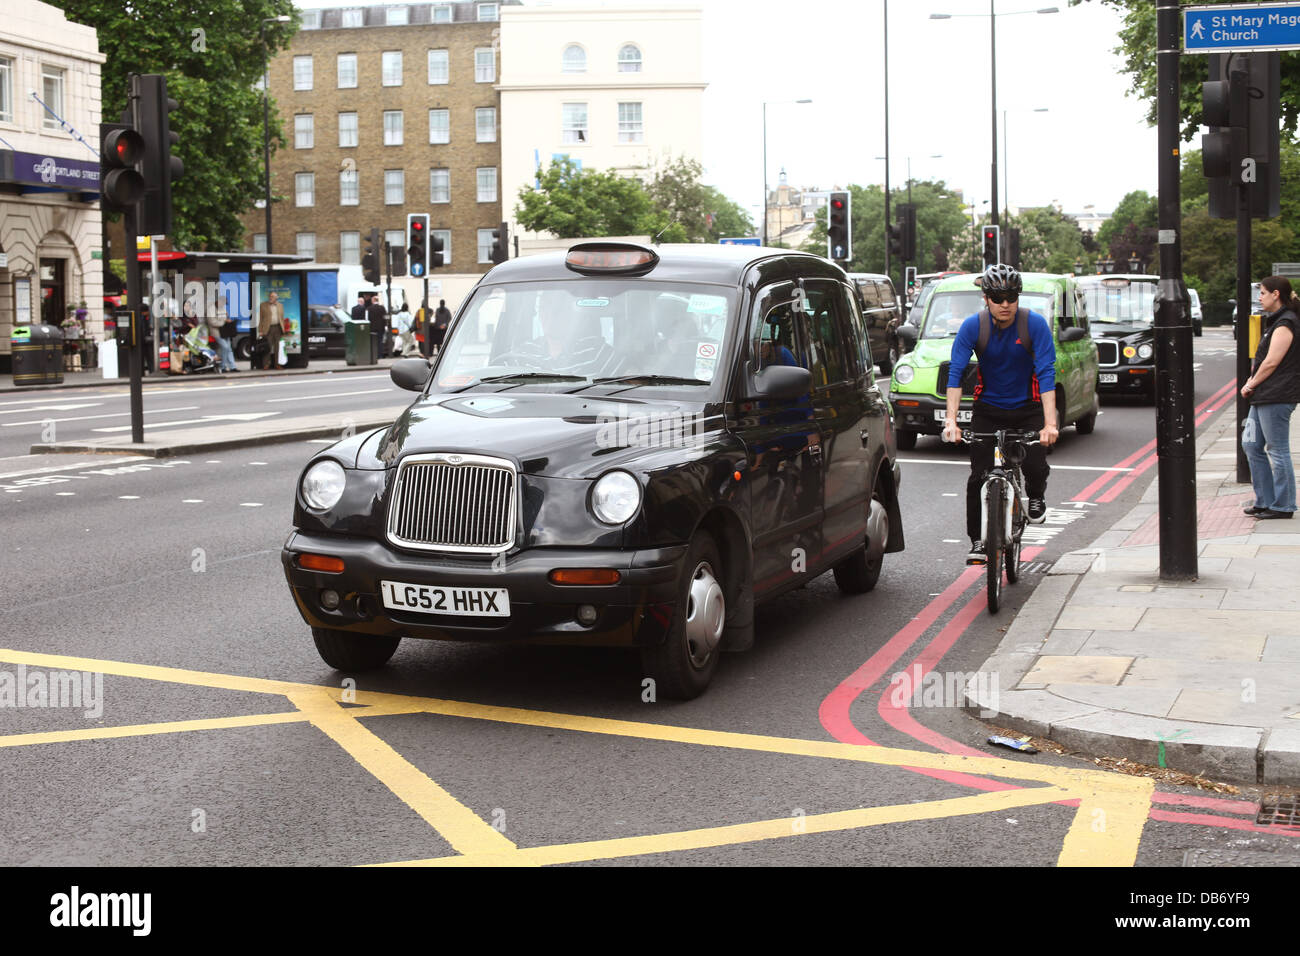 London street scene with a black taxi cab and cyclist. 4th July 2013 Stock Photo